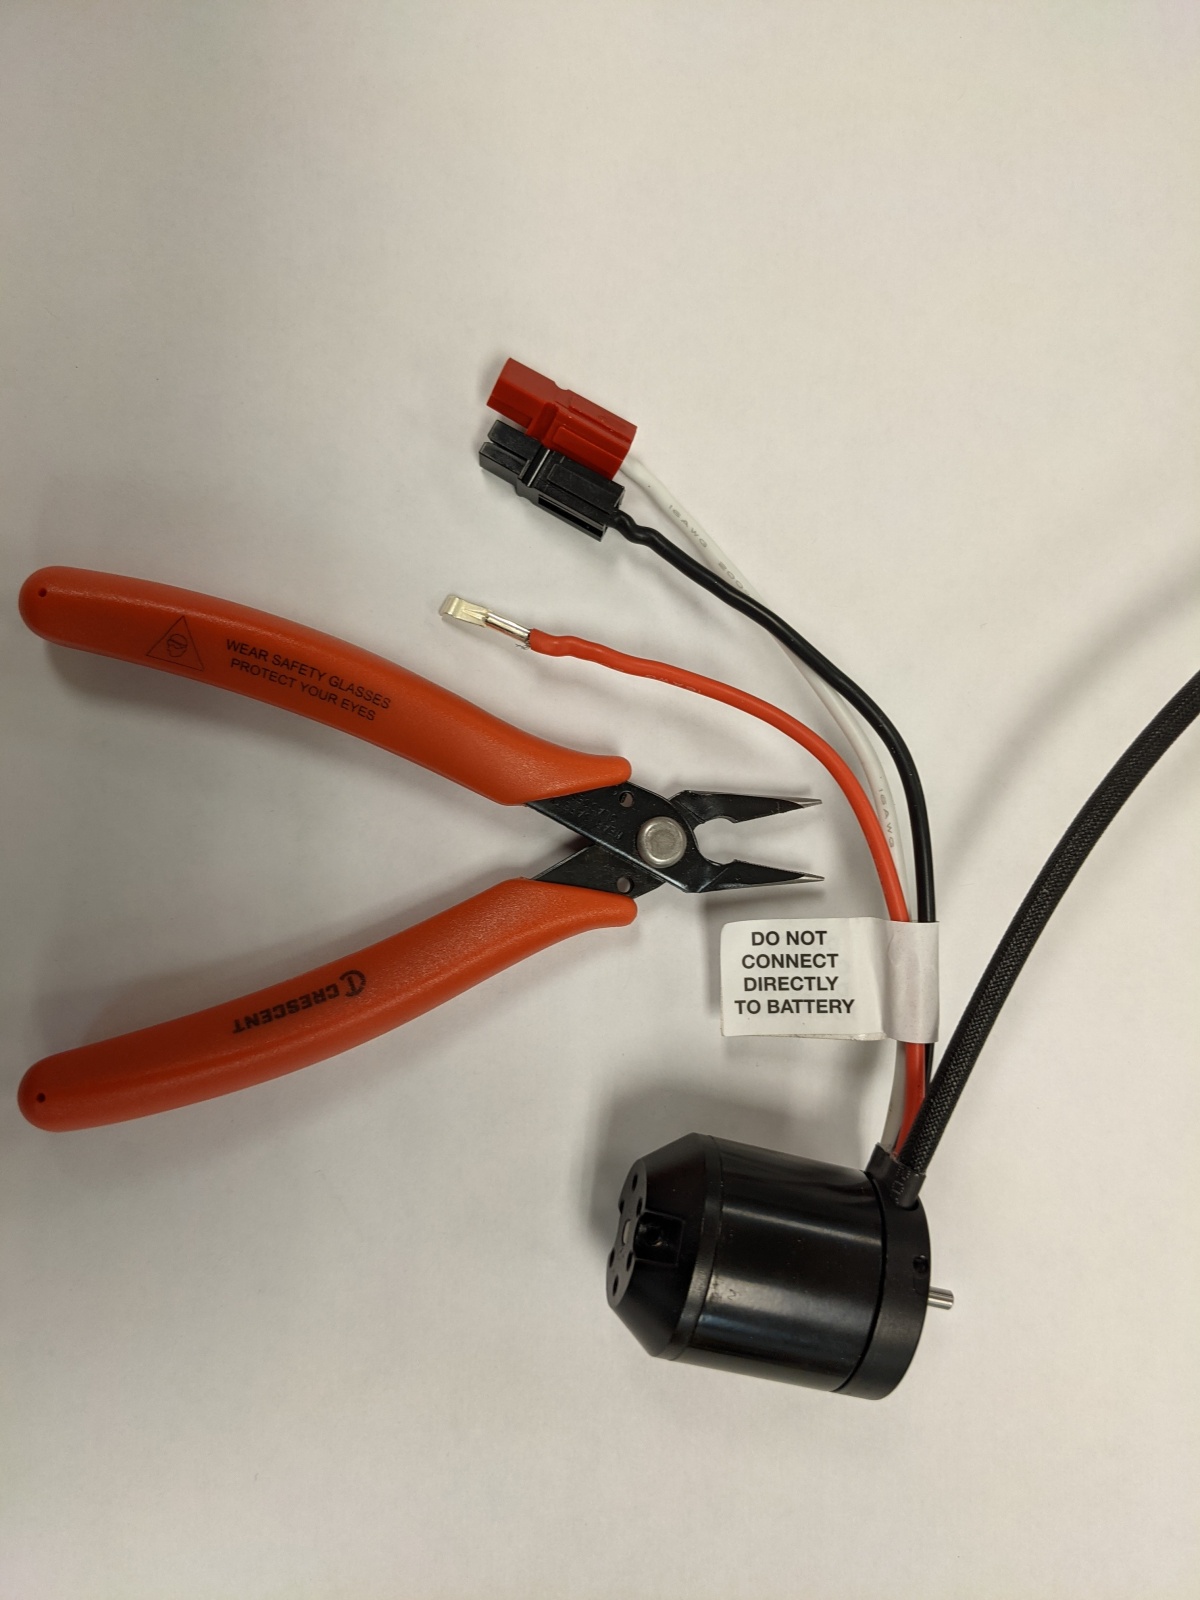 Wiring the #Neo550 motor: tips and tricks @REVrobotics @hhs4152